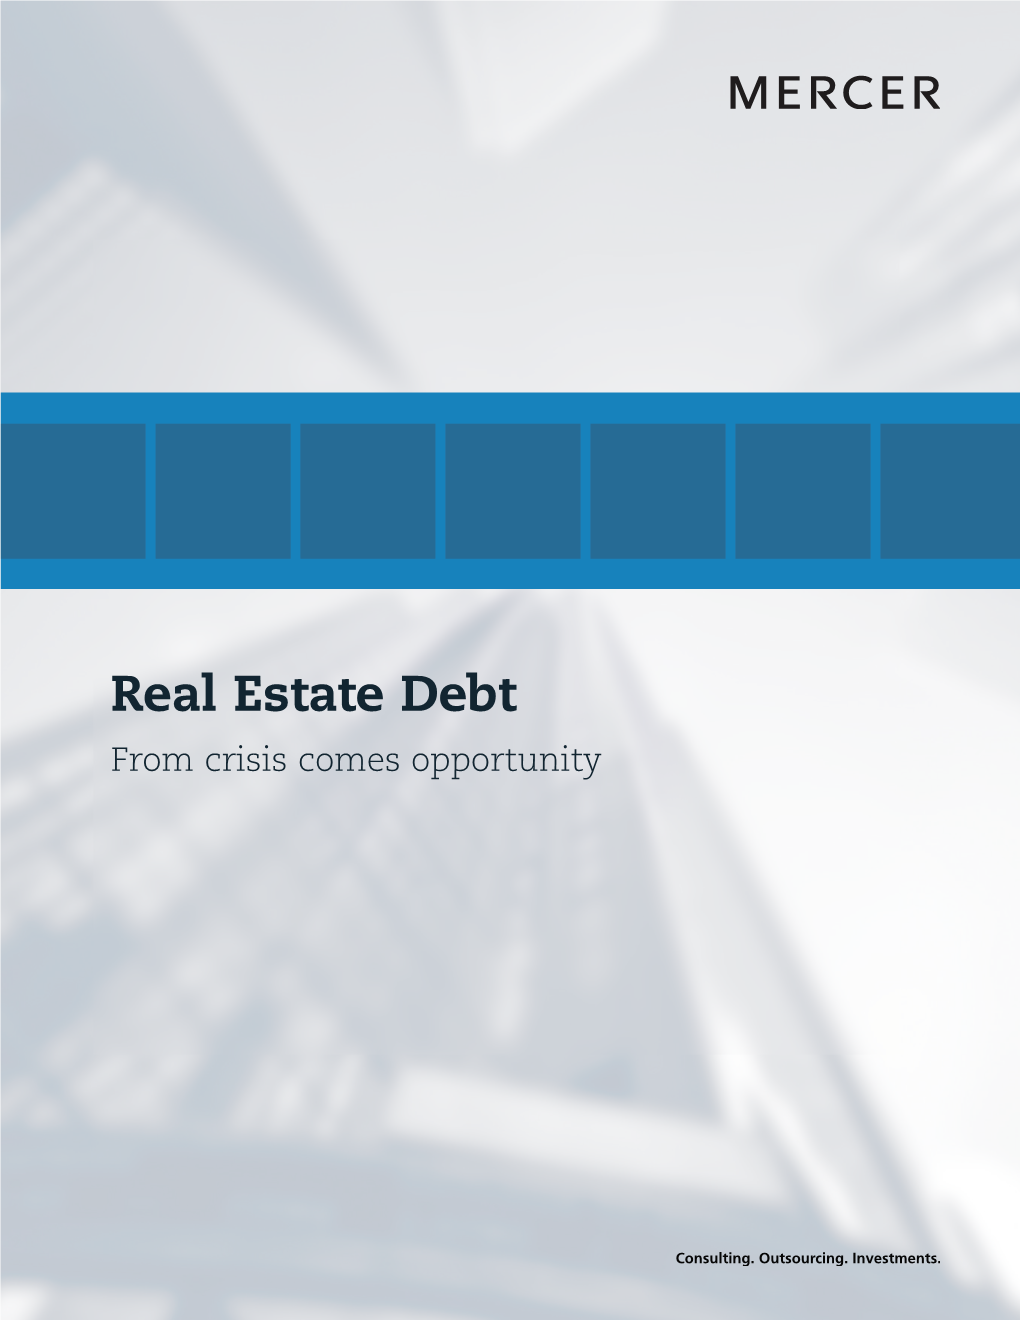 Real Estate Debt from Crisis Comes Opportunity Economic Backdrop